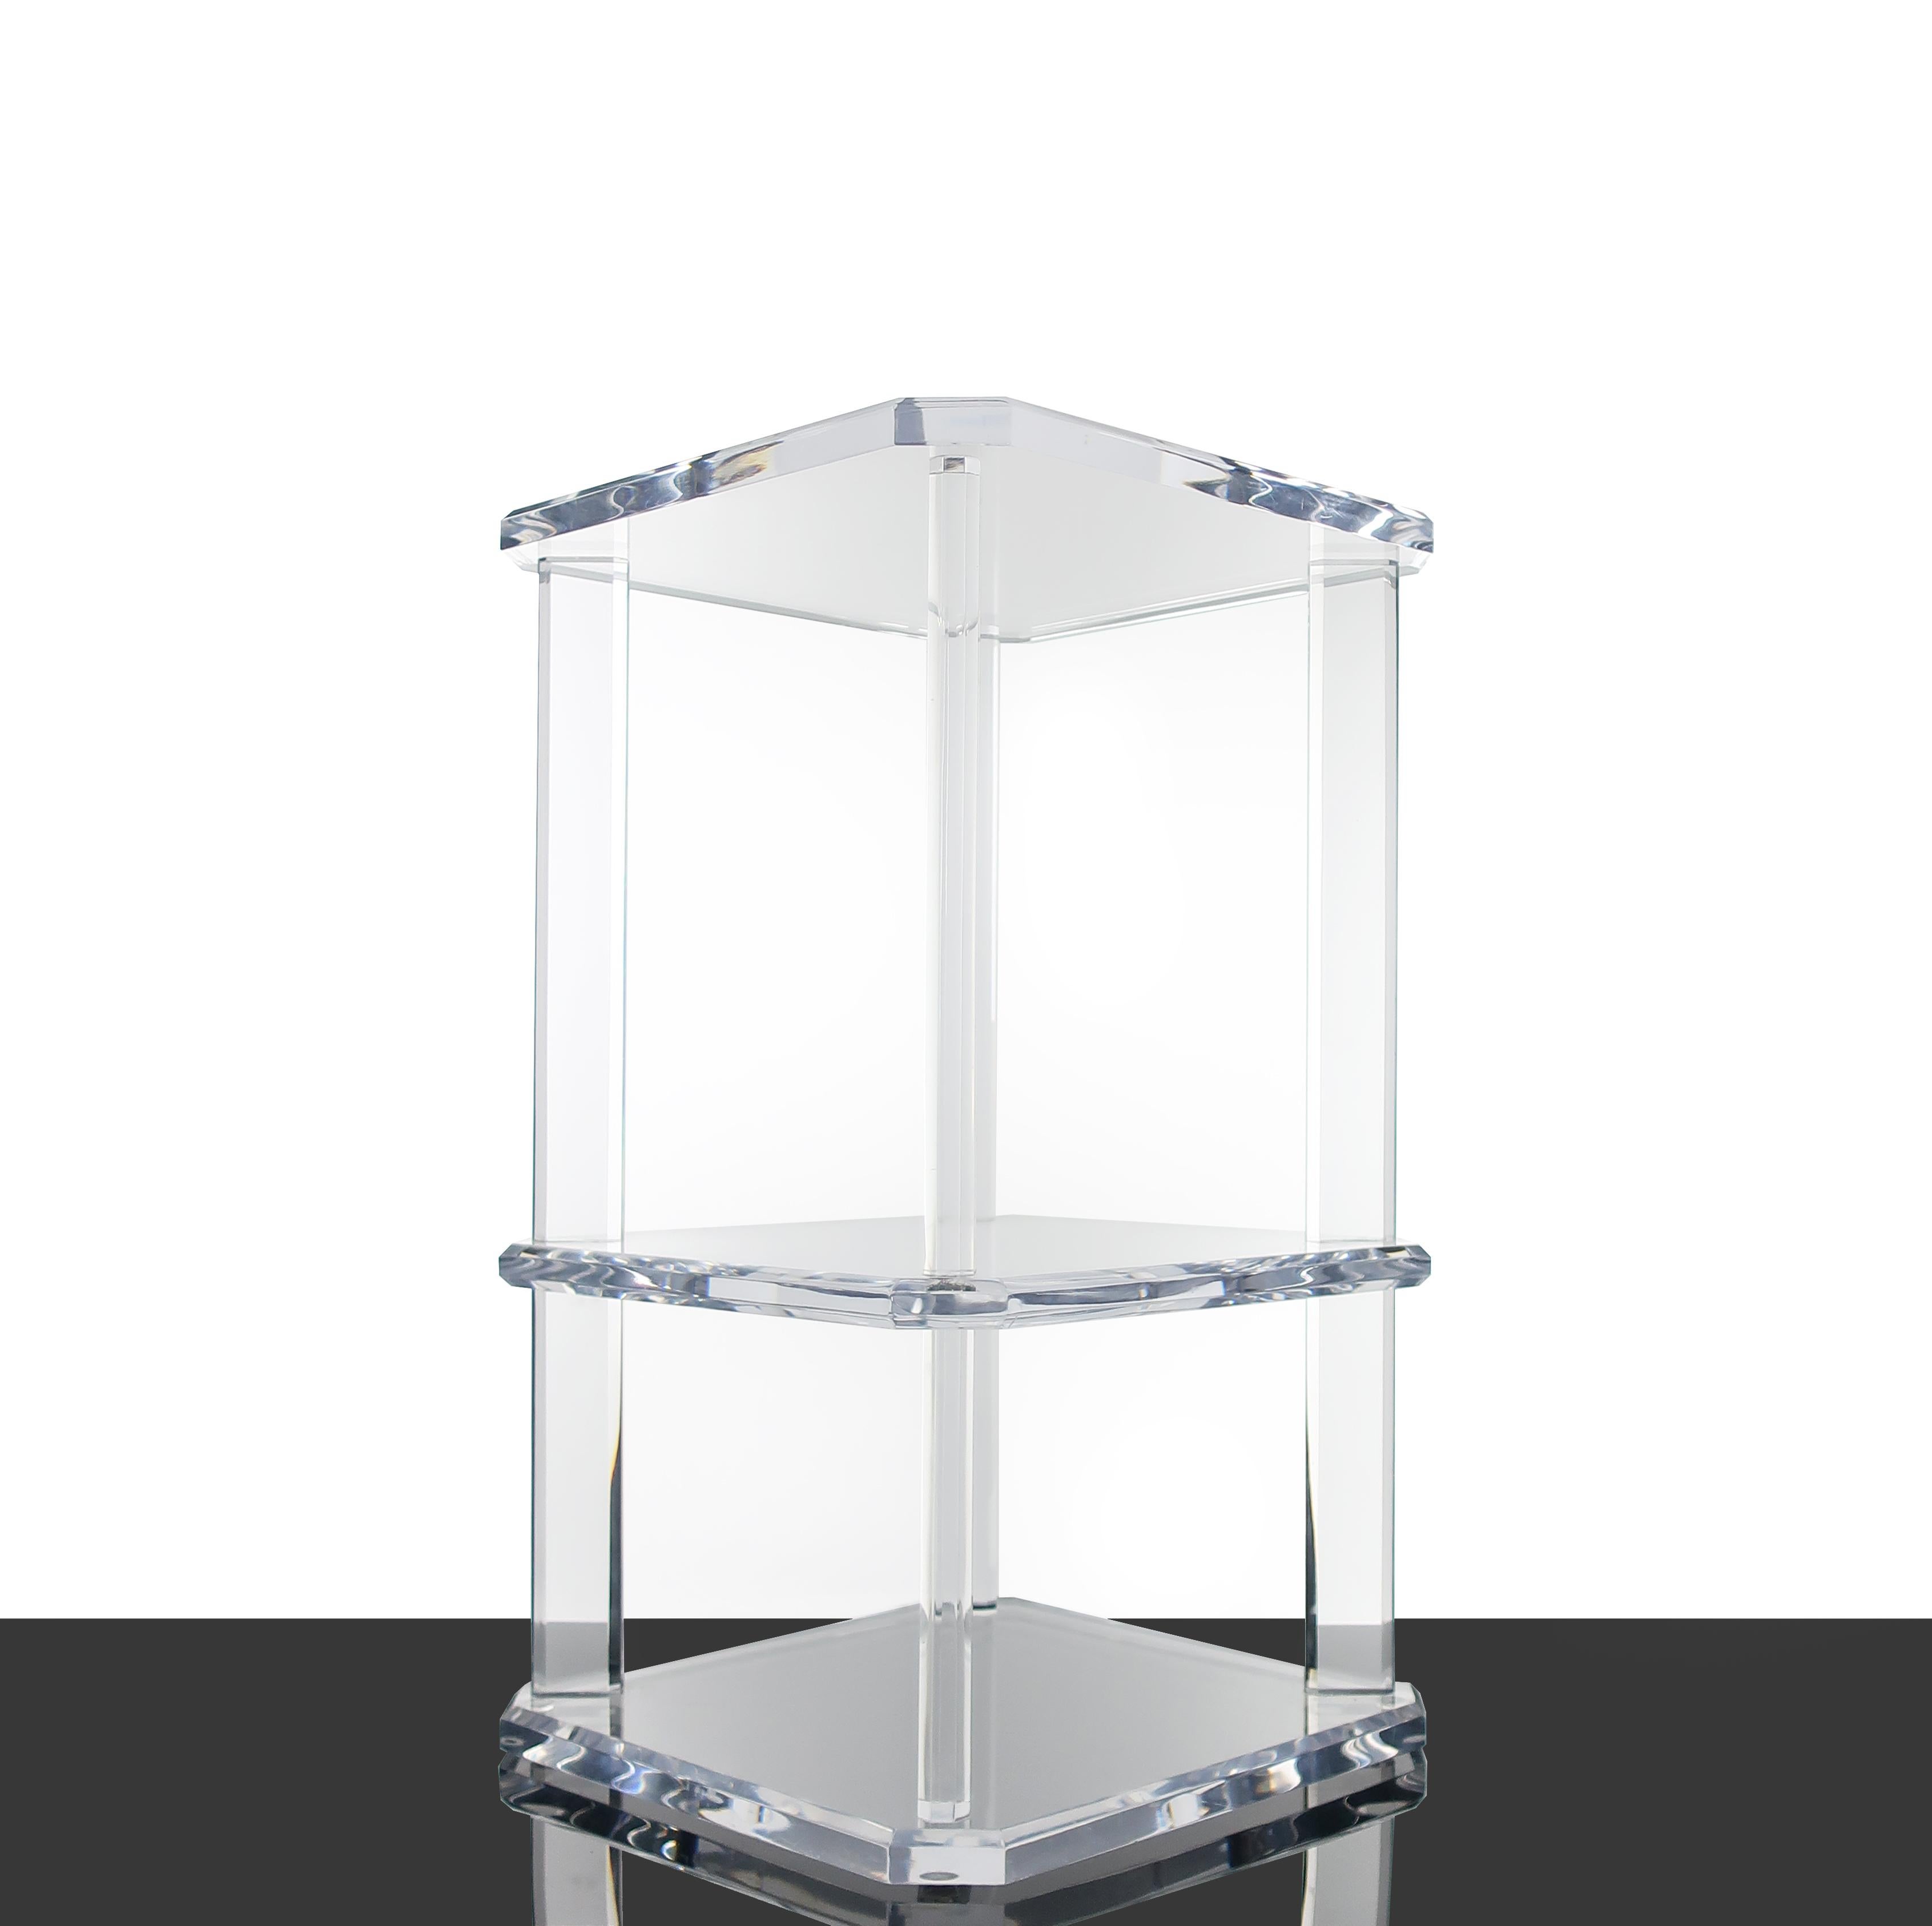 A vintage Lucite multi-shelf occasional or side table in the style of Charles Hollis Jones and Les Prismatiques. Each piece is thick and beveled, catching light beautifully yet giving it a feeling of weightlessness. Square in shape with three